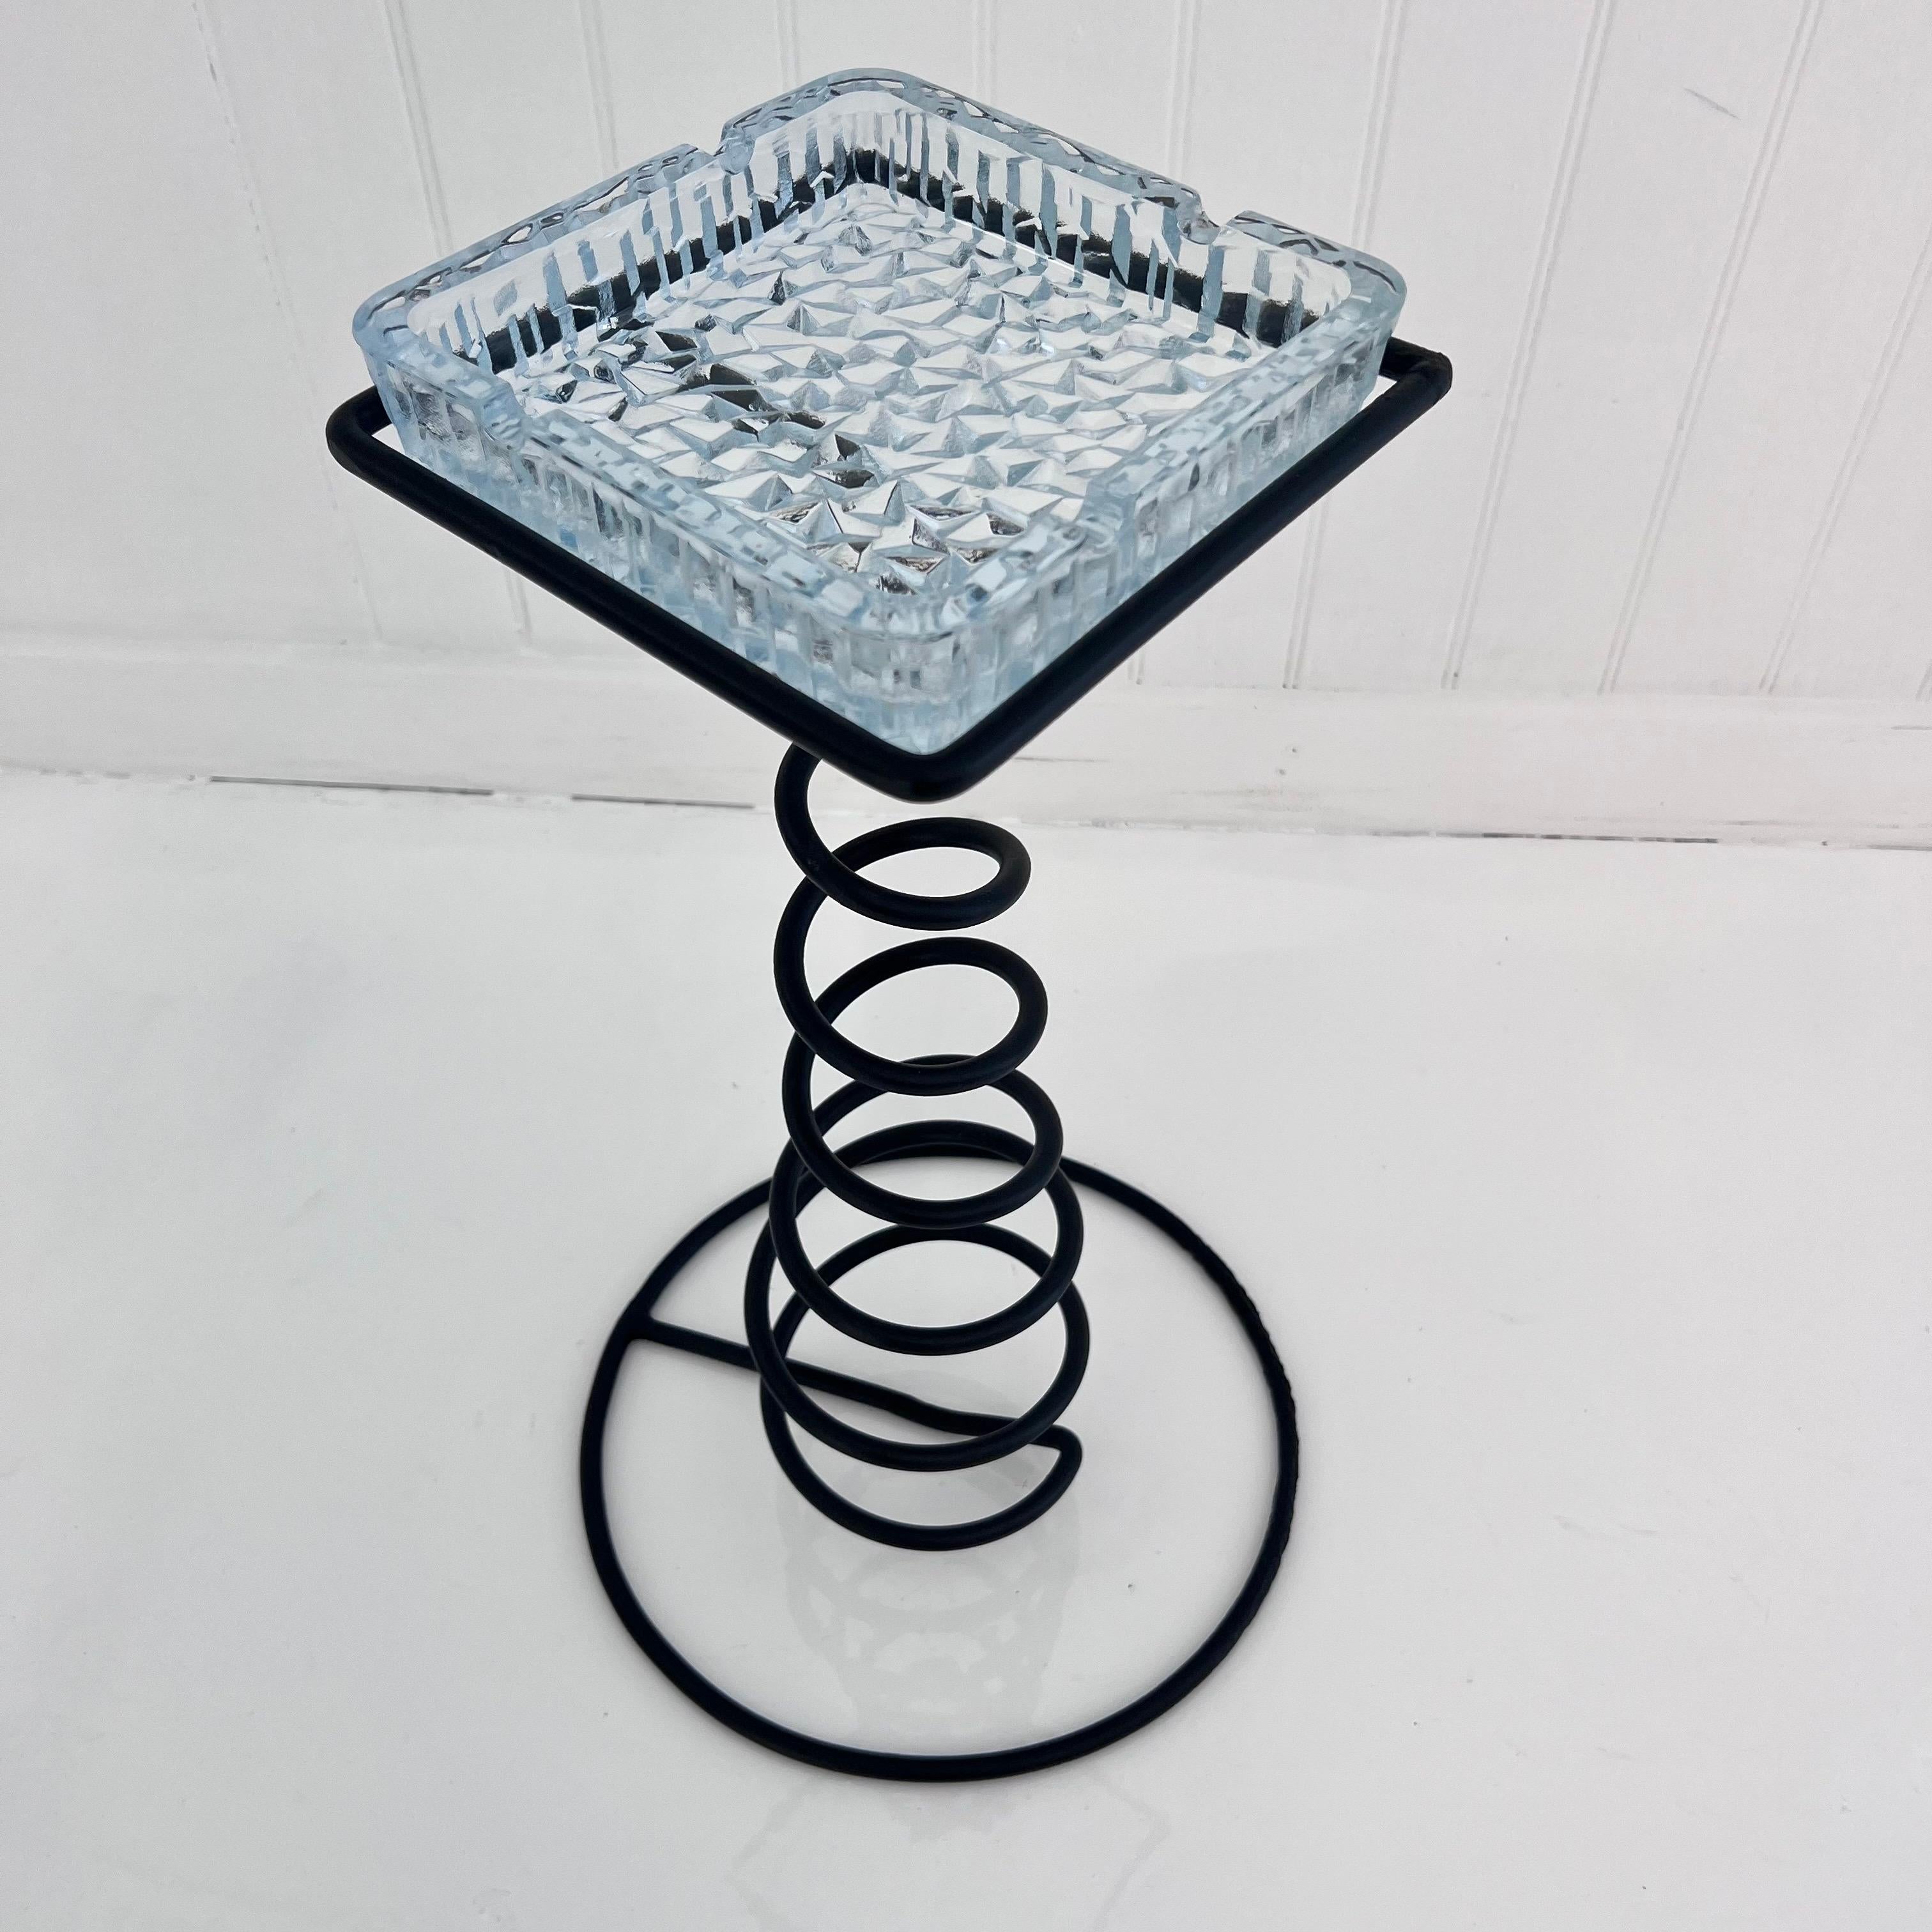 Spiral Iron and Glass Standing Catchall, 1960s France For Sale 3